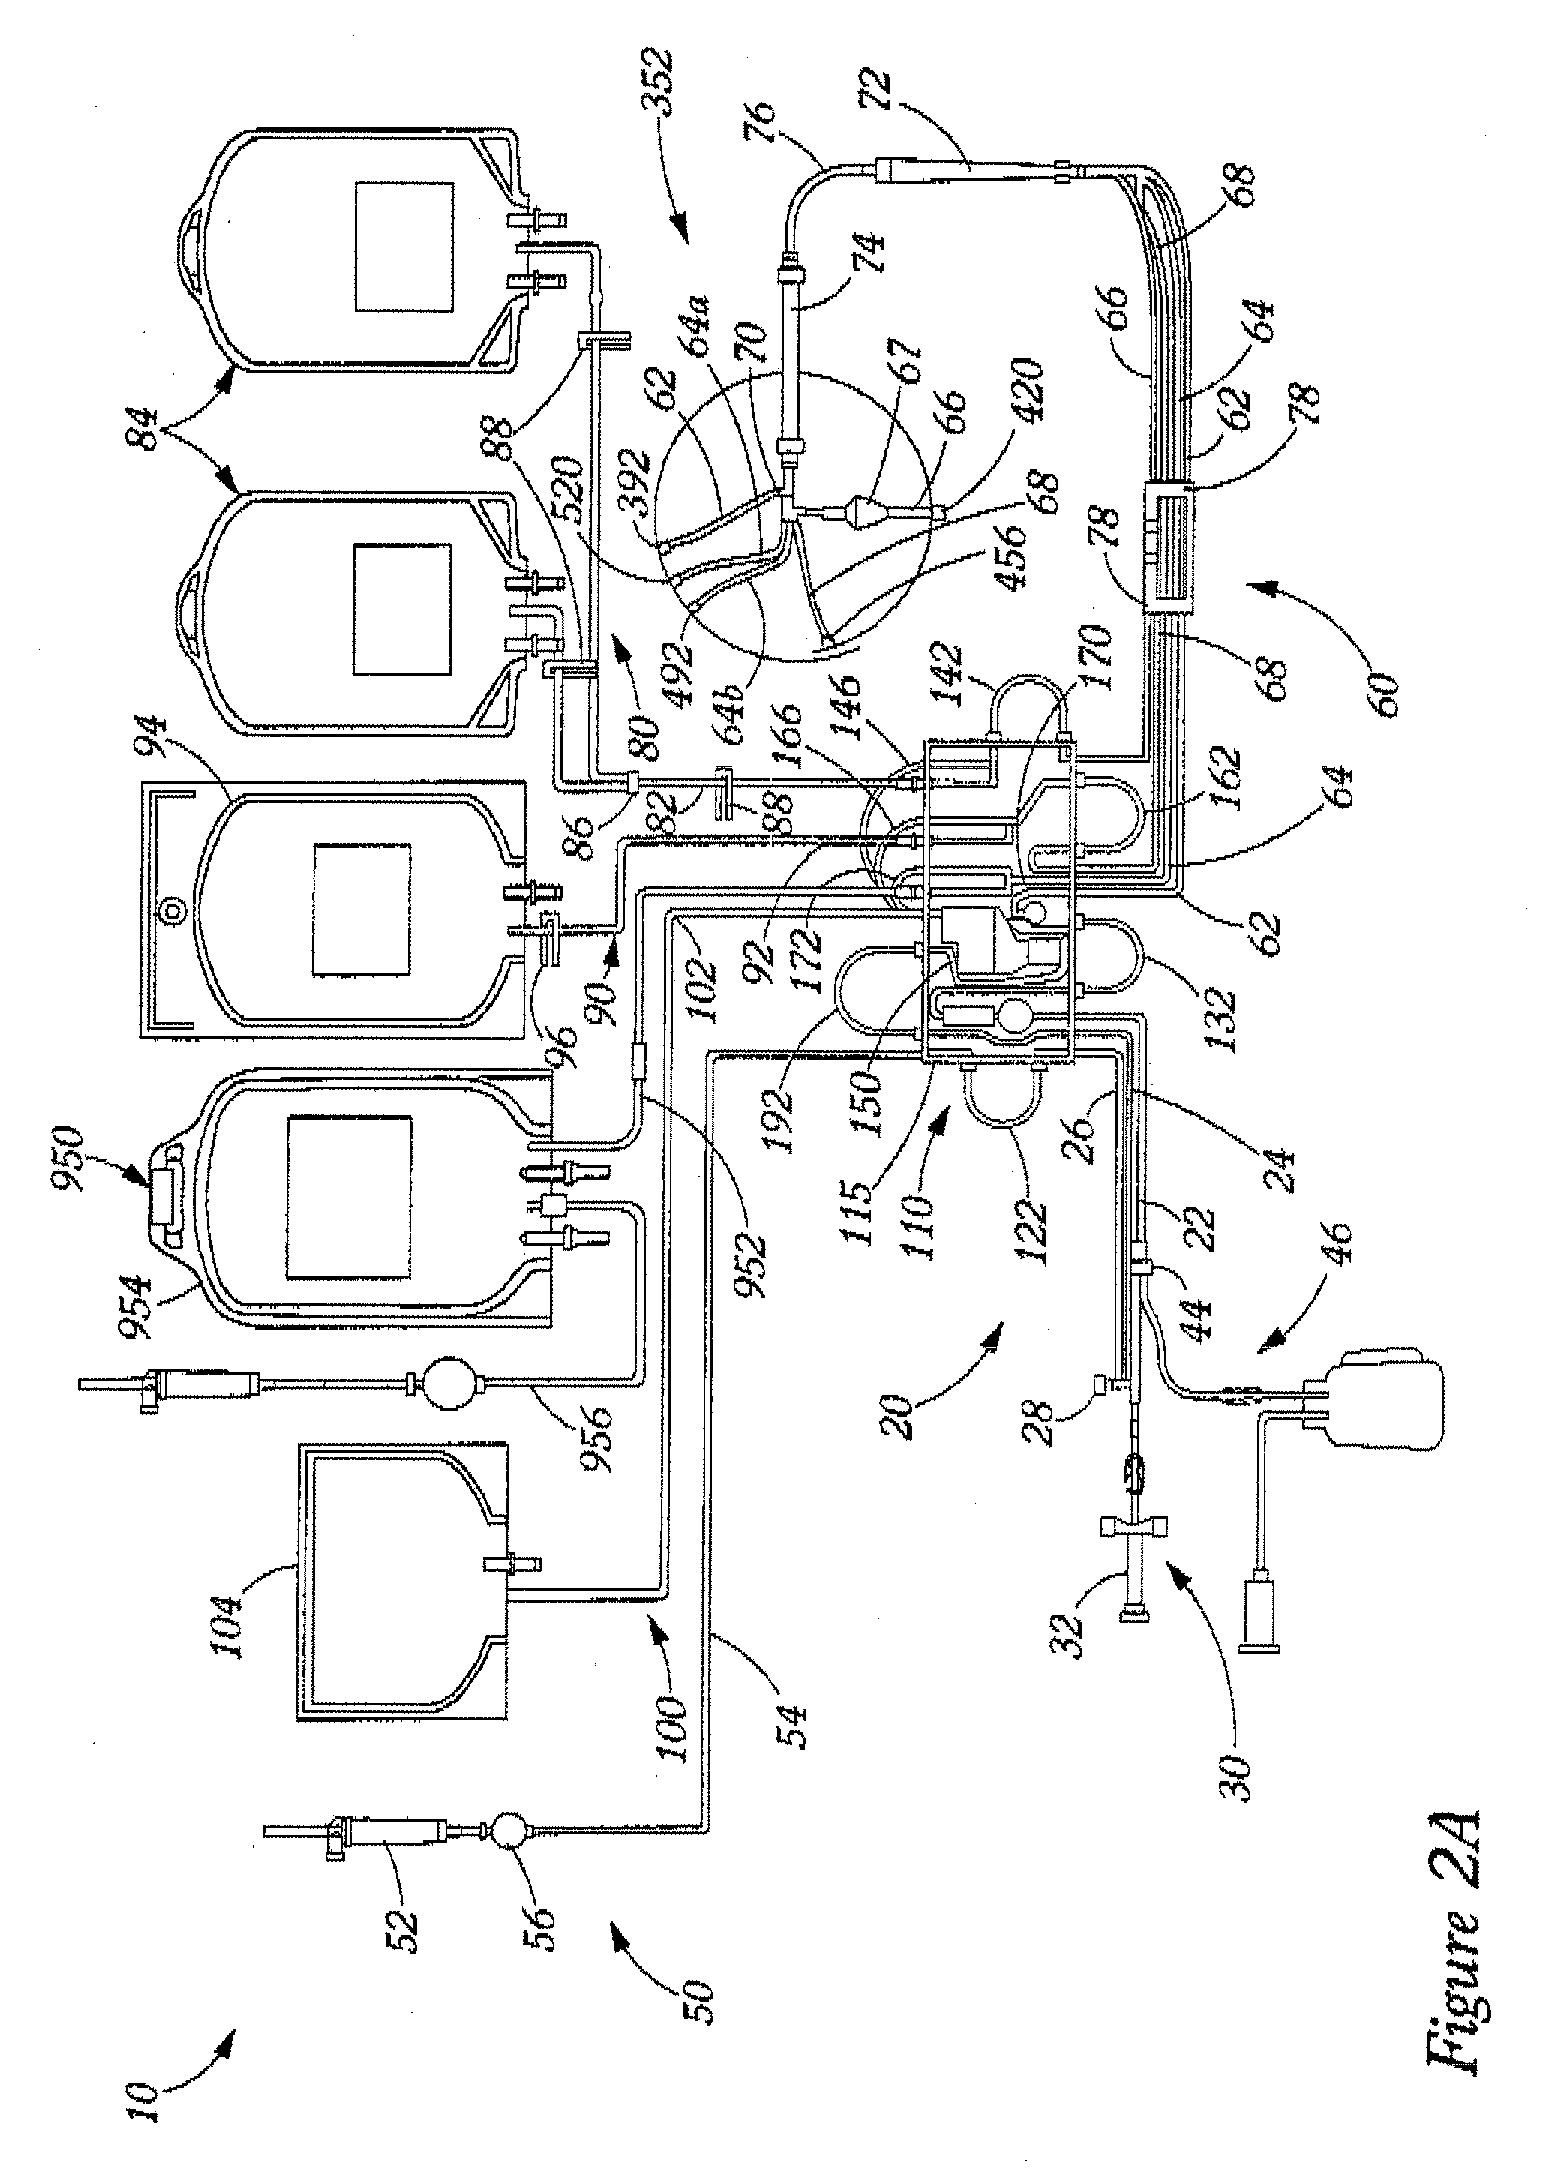 Extracorporeal Blood Processing Methods With Return-Flow Alarm